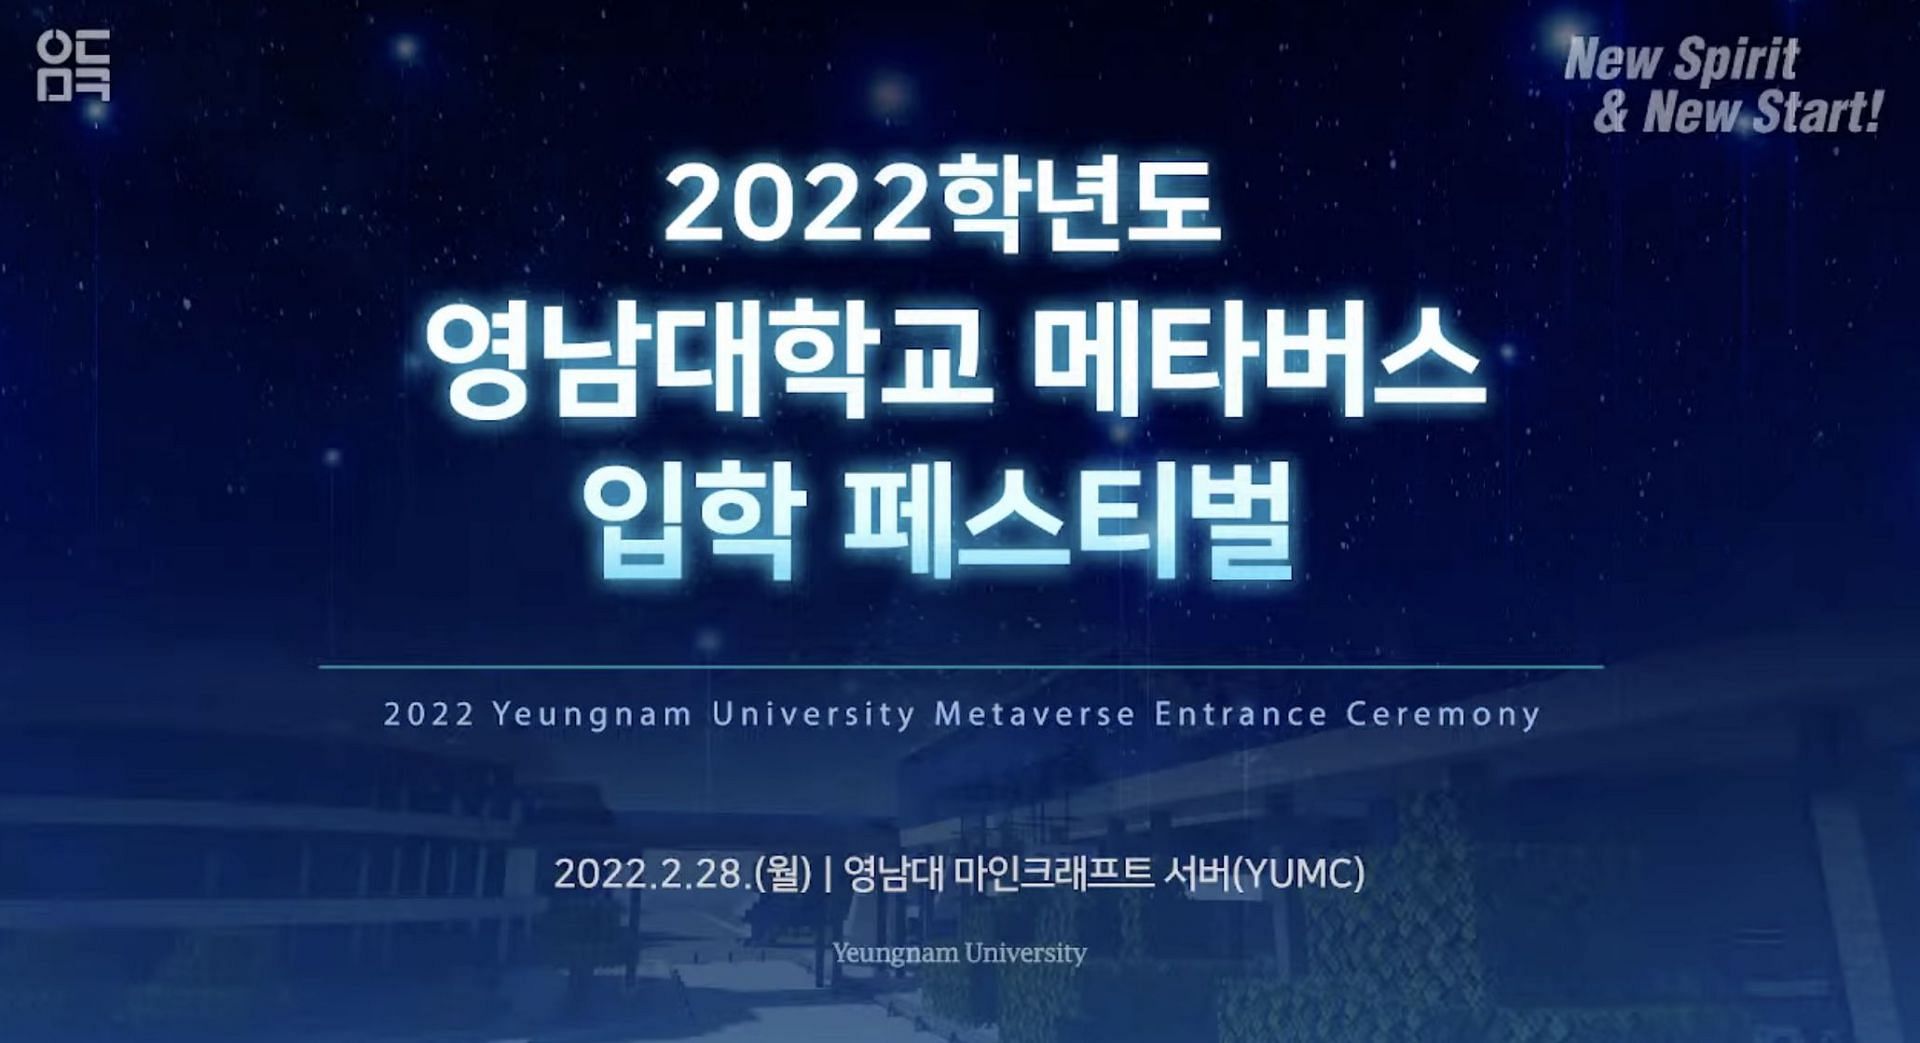 The official name of the ceremony (Image via 영남대학교 [Yeungnam University] on YouTube)